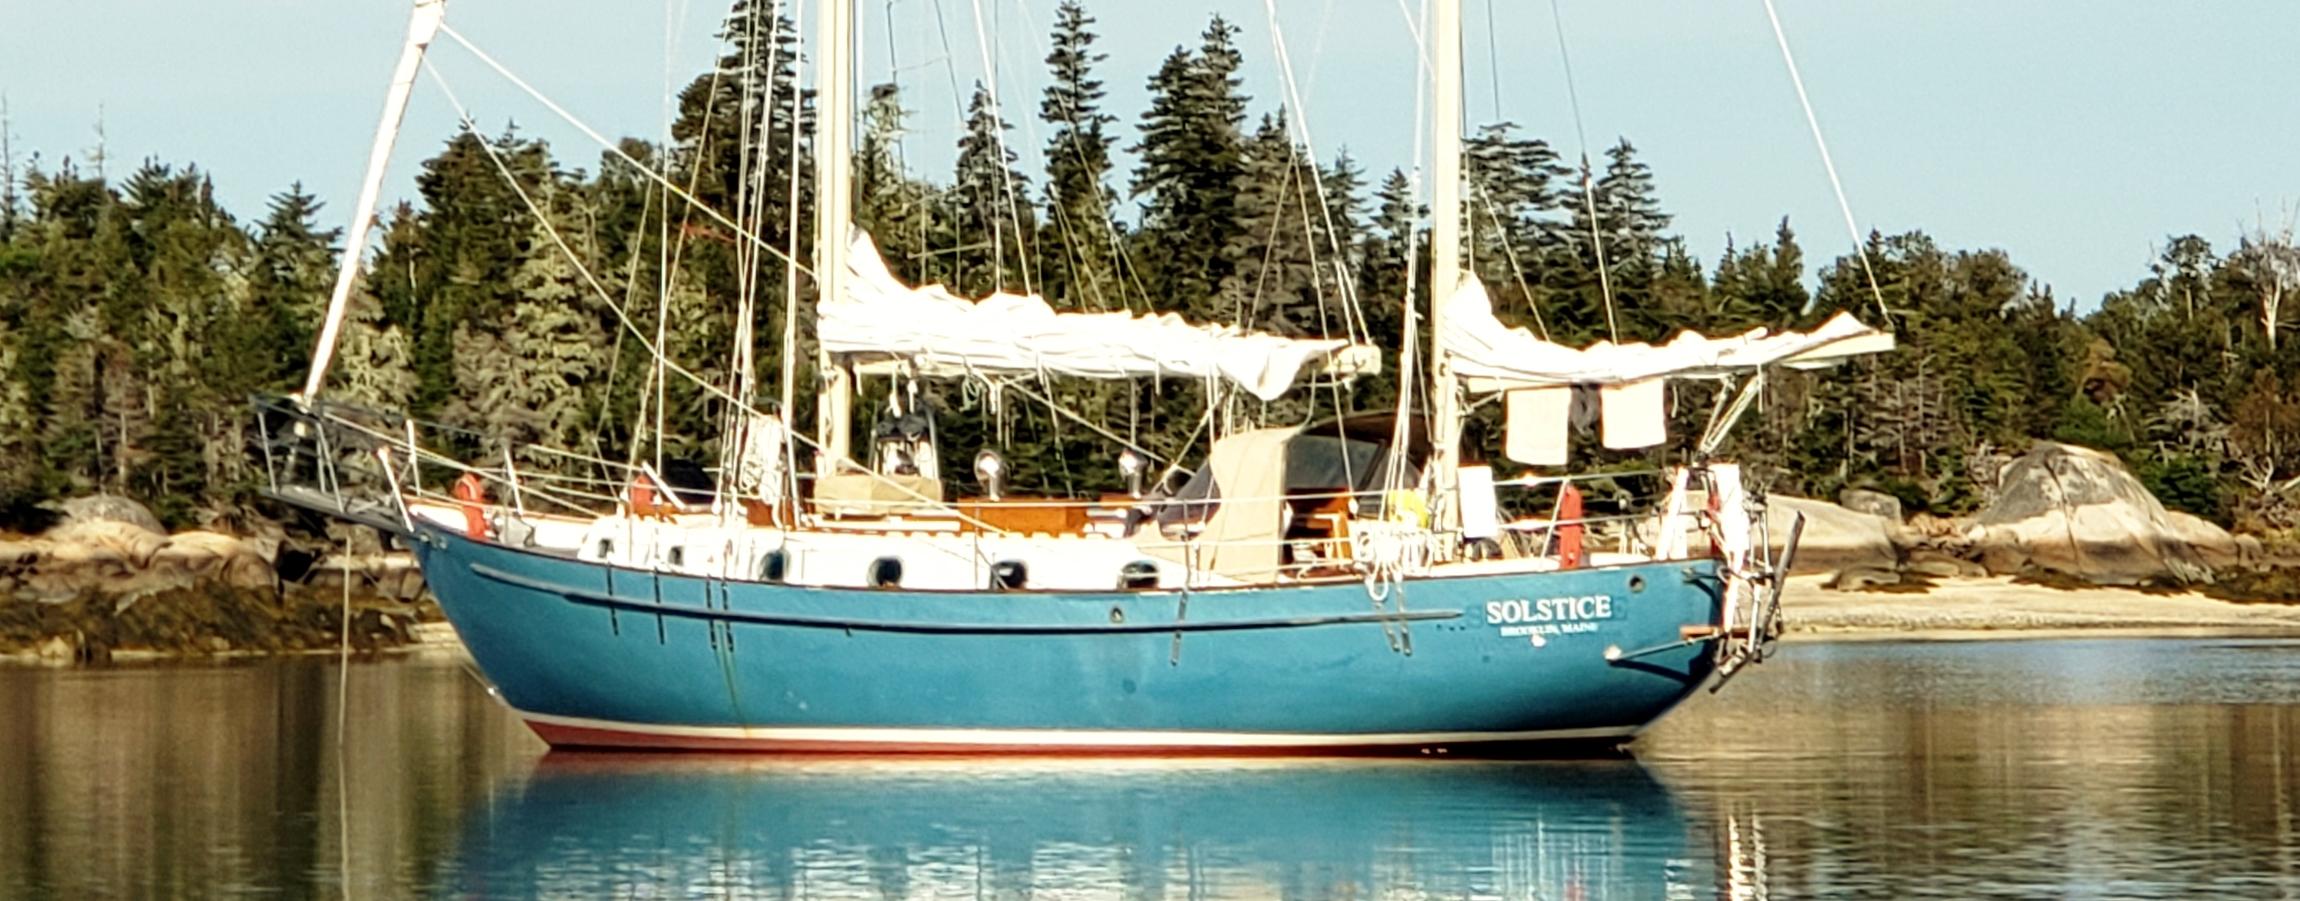 1976 Westsail Double-Headsail Ketch